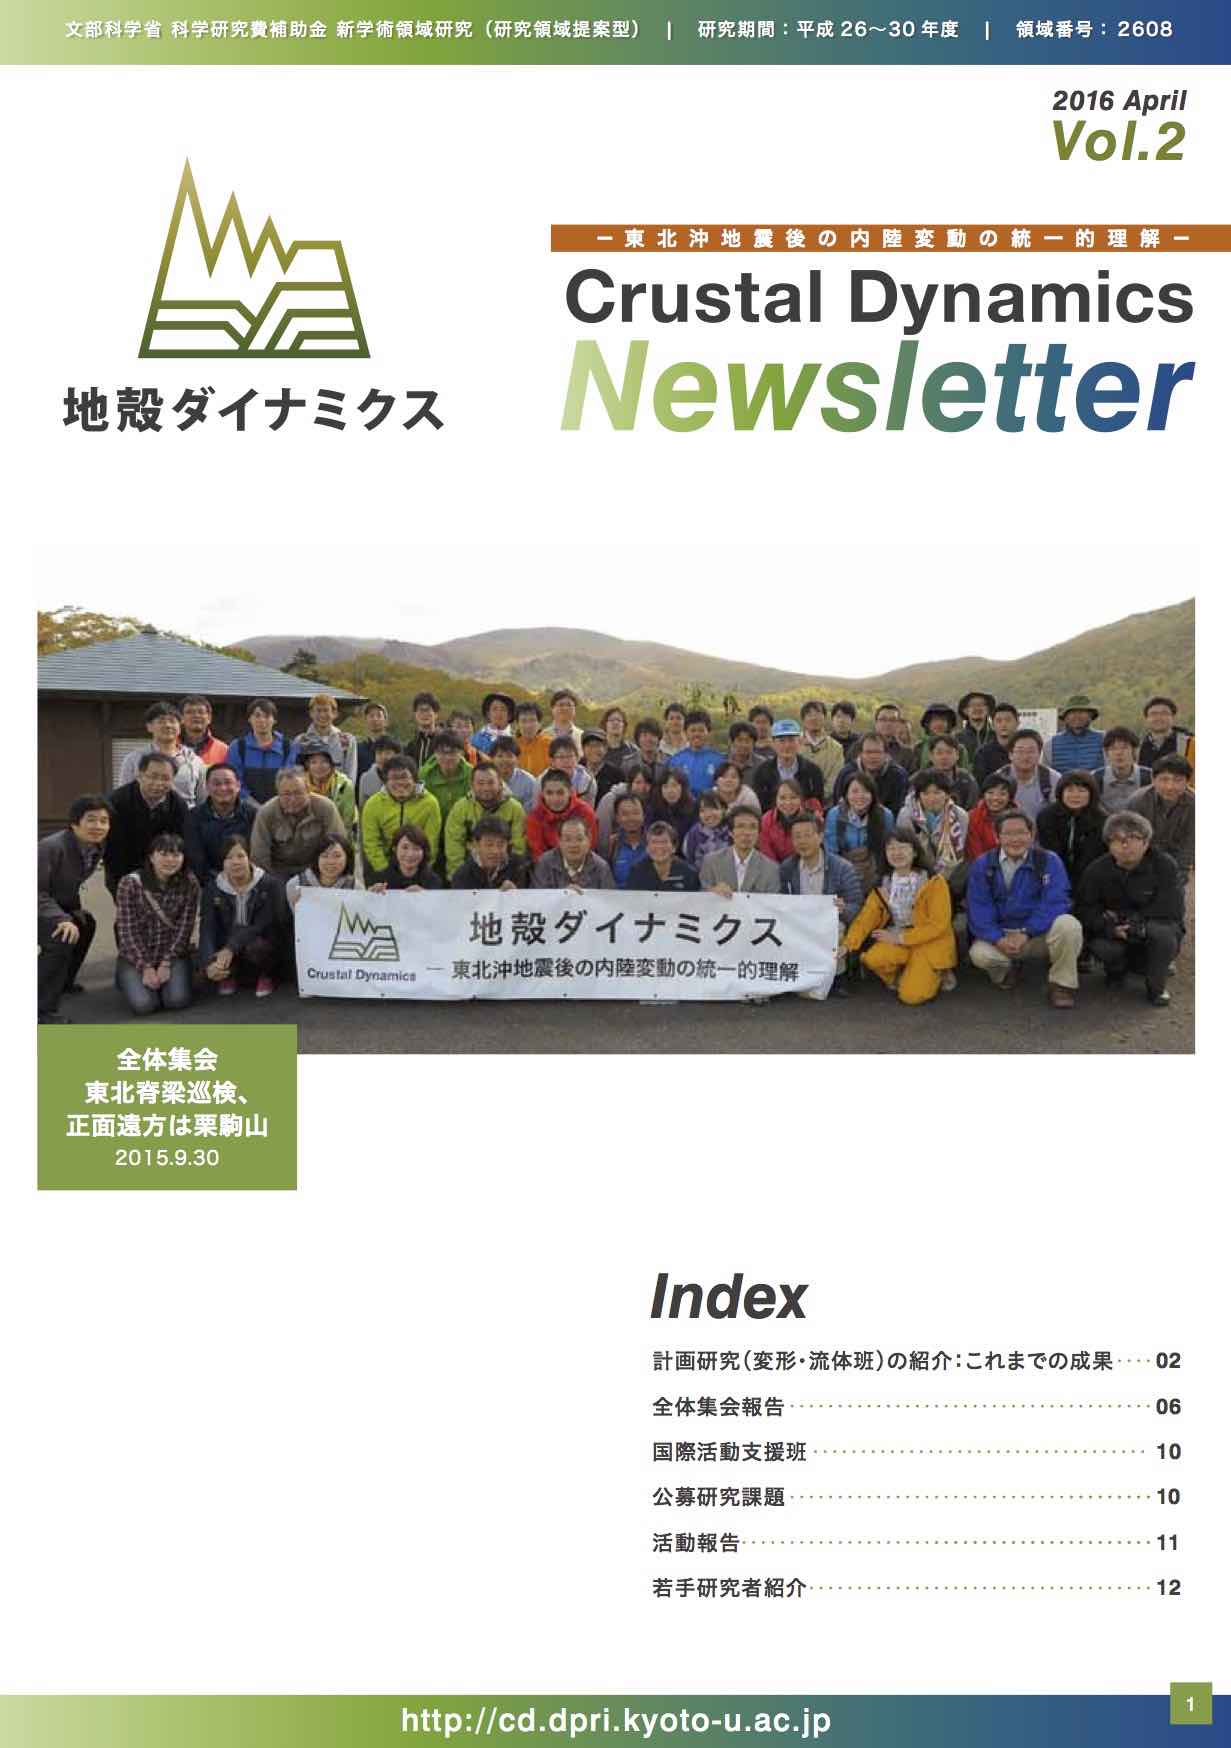 NewsLetter Vol.2 frontface2